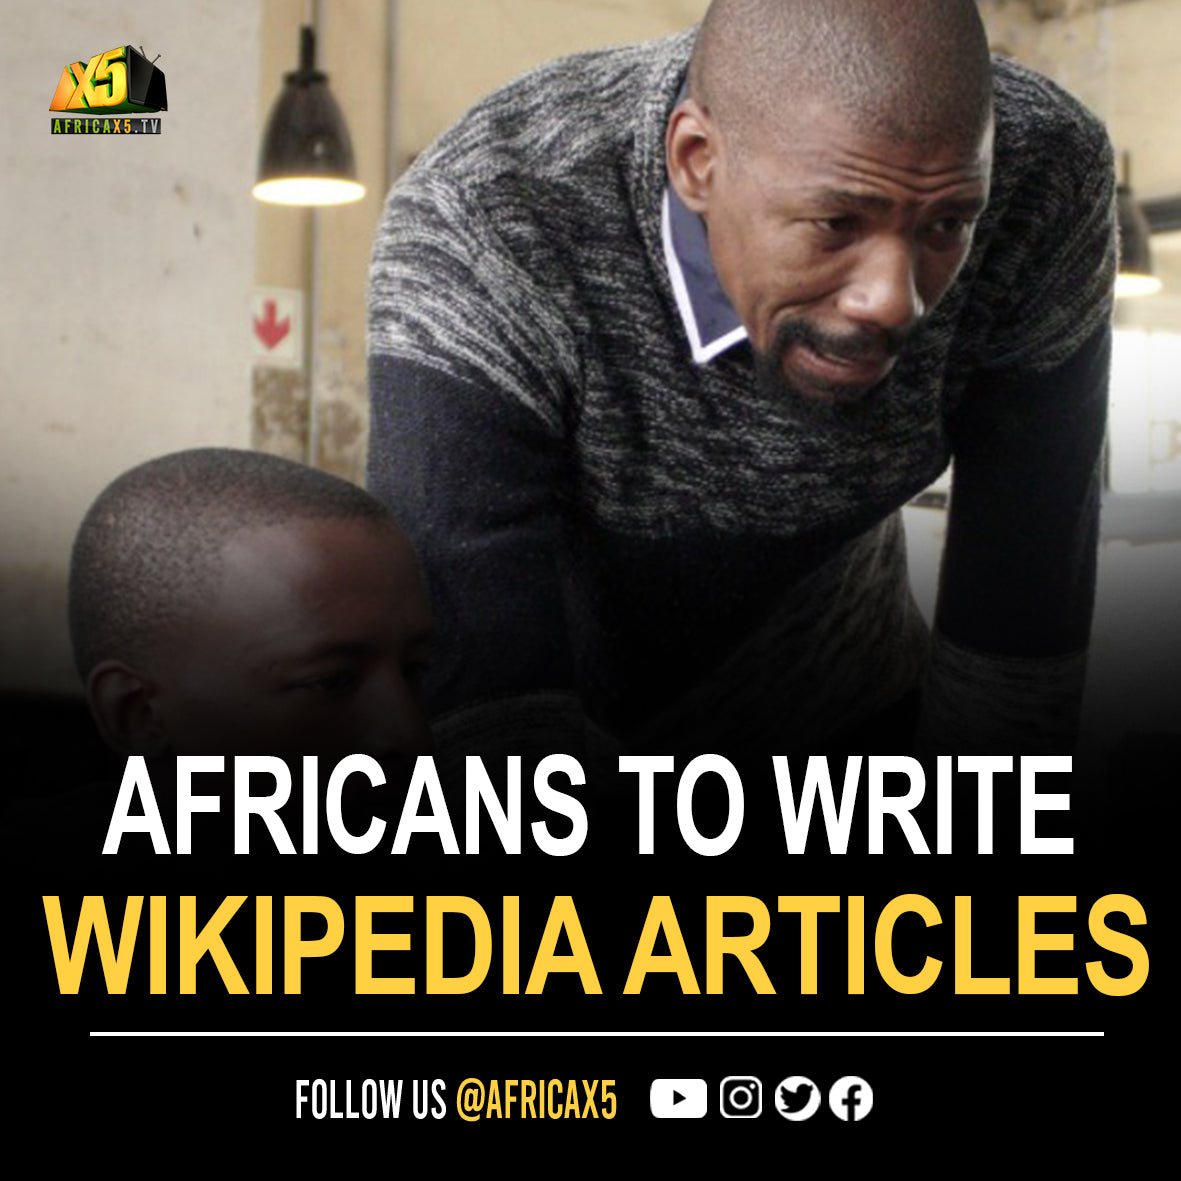 Africans Are Being Empowered to Write and Edit Wikipedia Articles About Their Own Countries and Culture